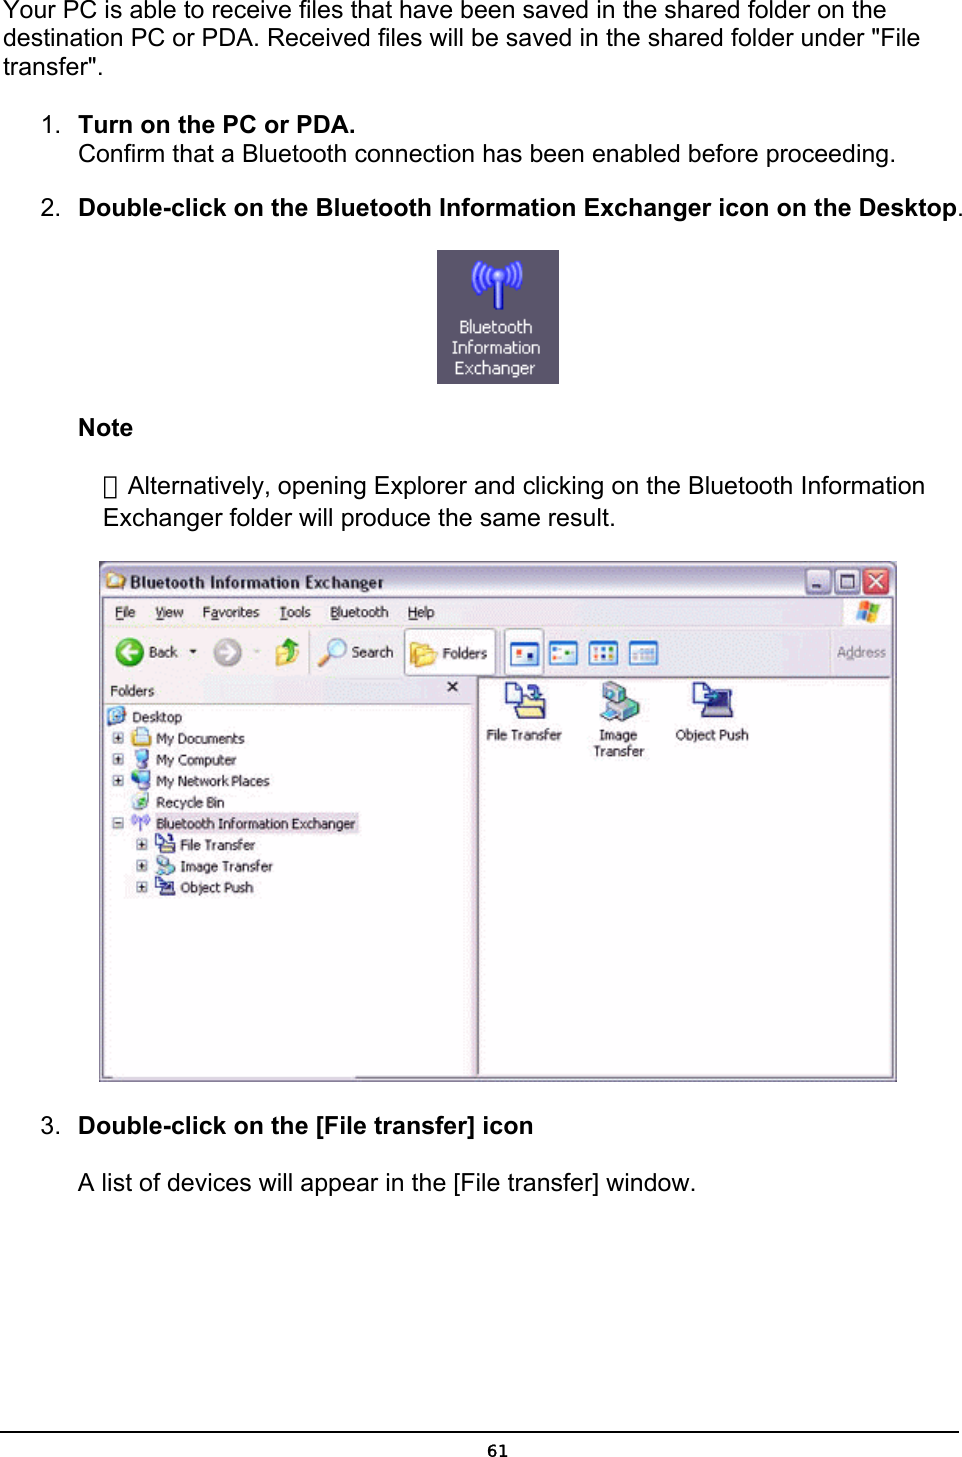  Your PC is able to receive files that have been saved in the shared folder on the destination PC or PDA. Received files will be saved in the shared folder under &quot;File transfer&quot;. 1.  Turn on the PC or PDA. Confirm that a Bluetooth connection has been enabled before proceeding. 2.  Double-click on the Bluetooth Information Exchanger icon on the Desktop.  Note ．Alternatively, opening Explorer and clicking on the Bluetooth Information Exchanger folder will produce the same result.  3.  Double-click on the [File transfer] icon  A list of devices will appear in the [File transfer] window.  61